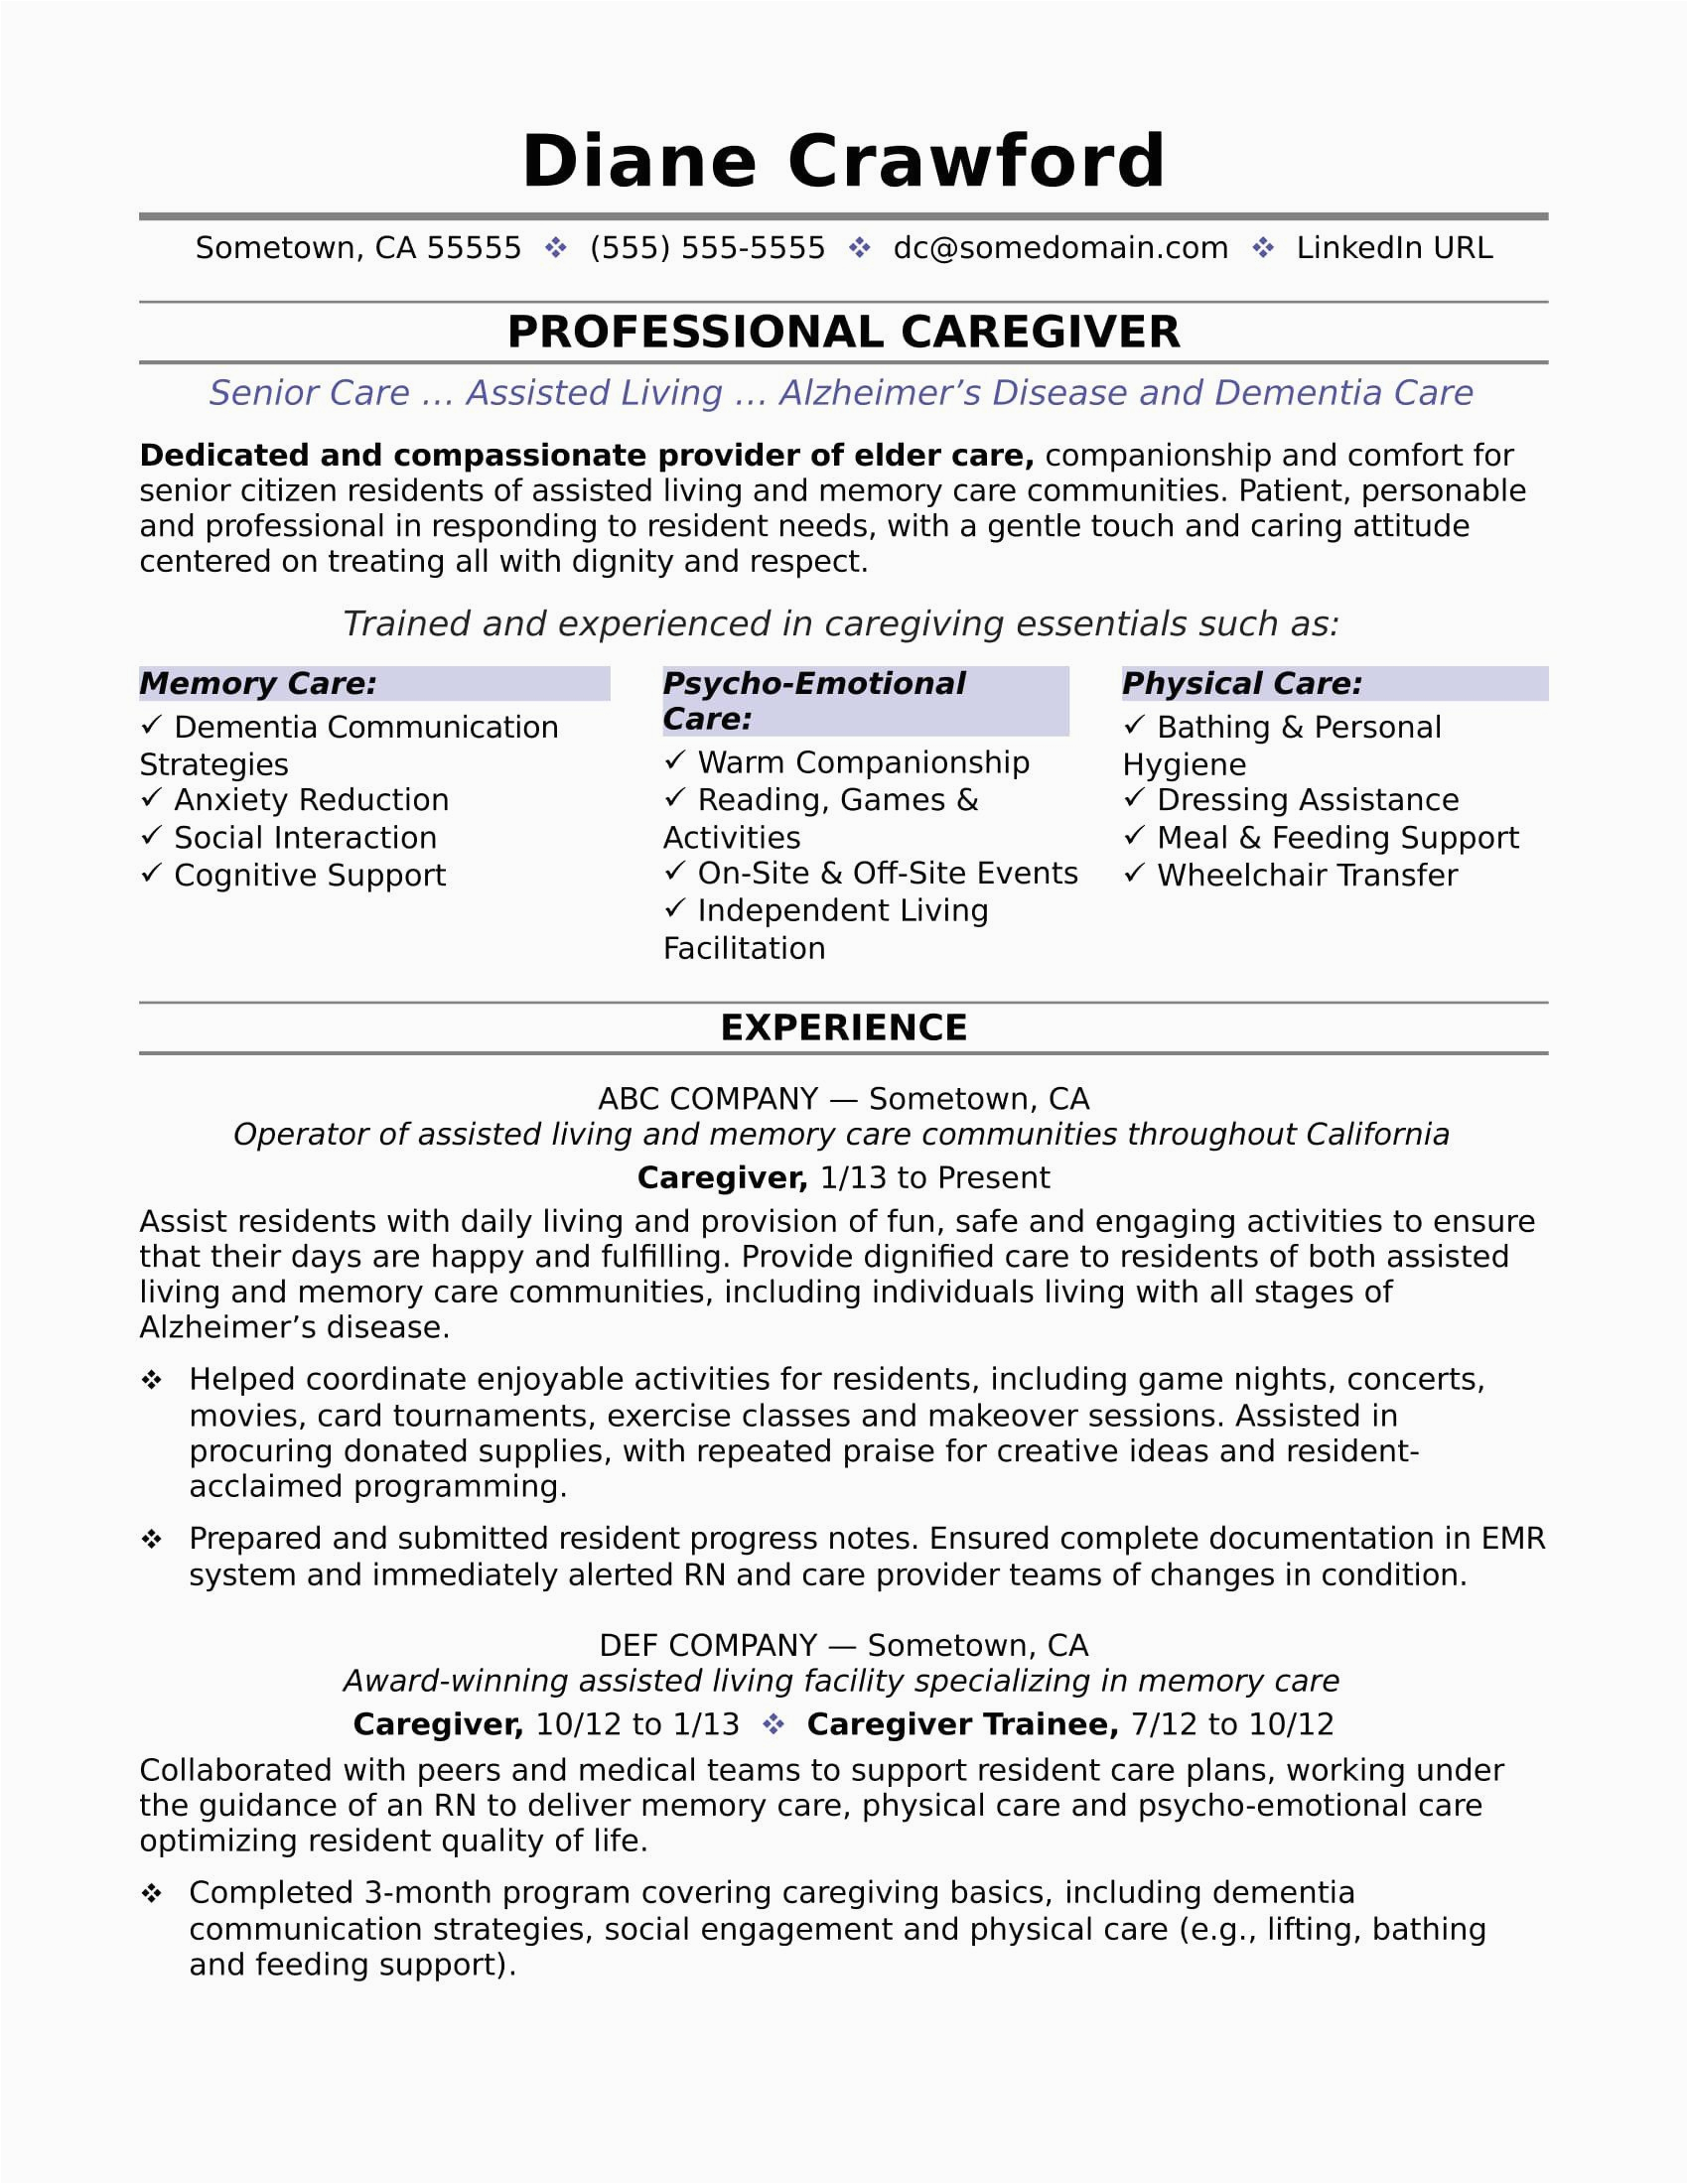 Aged Care Resume Sample No Experience Caregiver Resume No Experience New Caregiver Resume Sample